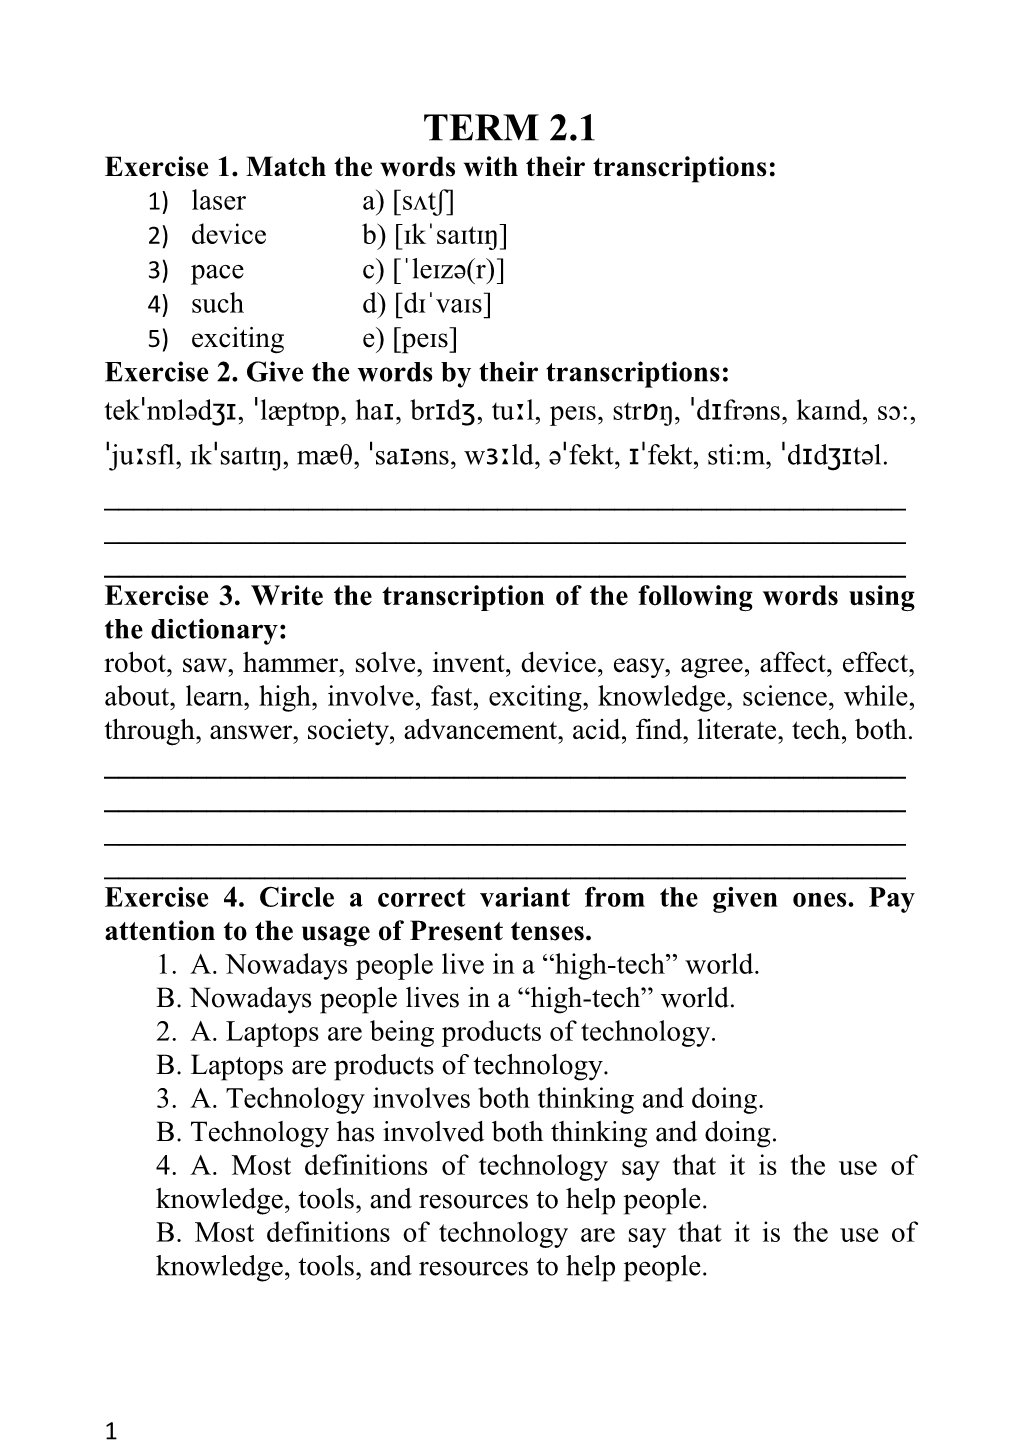 Exercise 1. Match the Words with Their Transcriptions